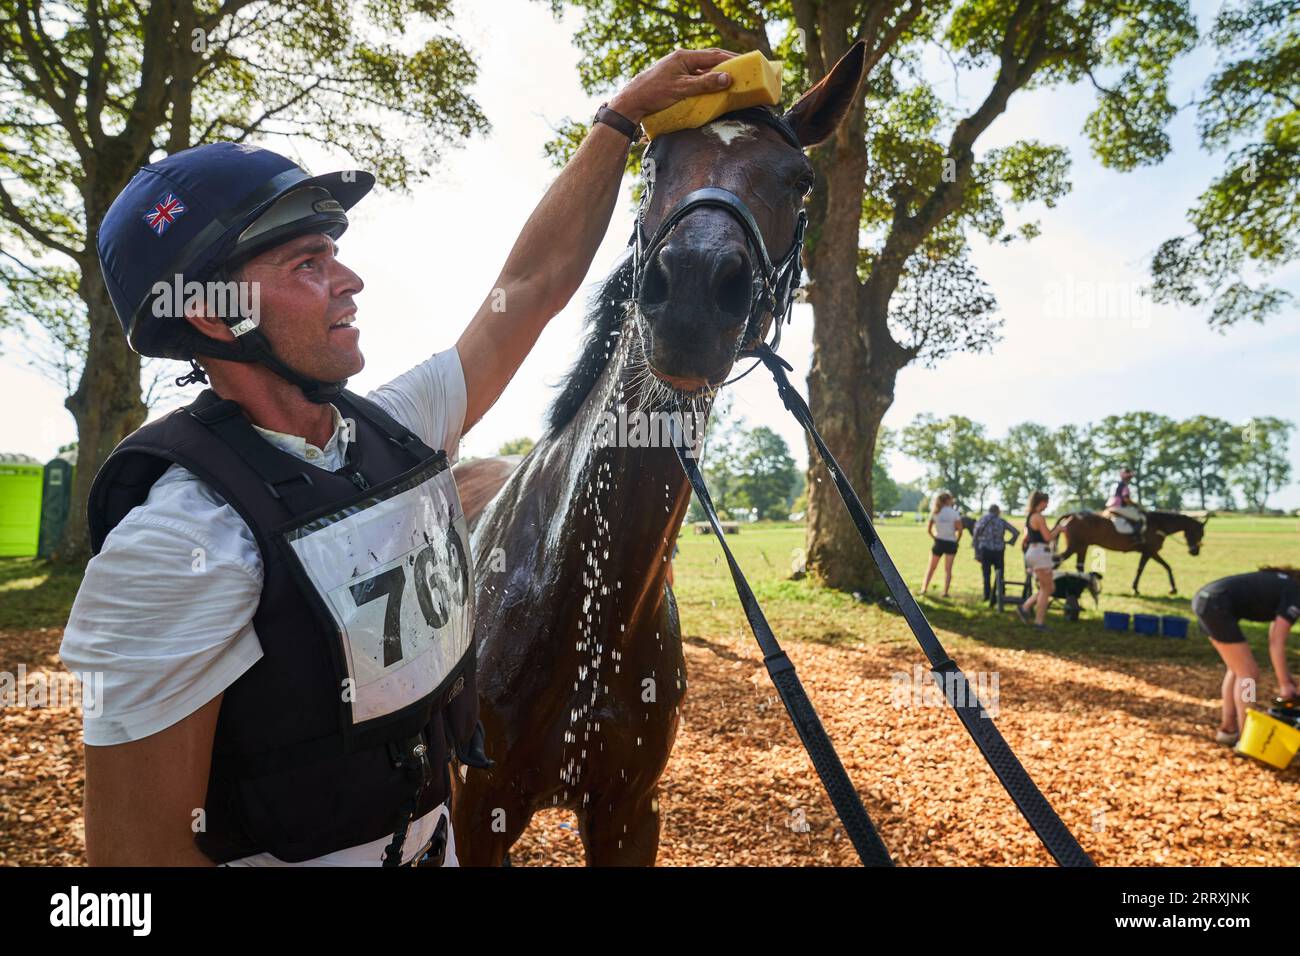 EDITORIAL USE ONLY A horse is cooled down with water after competing in